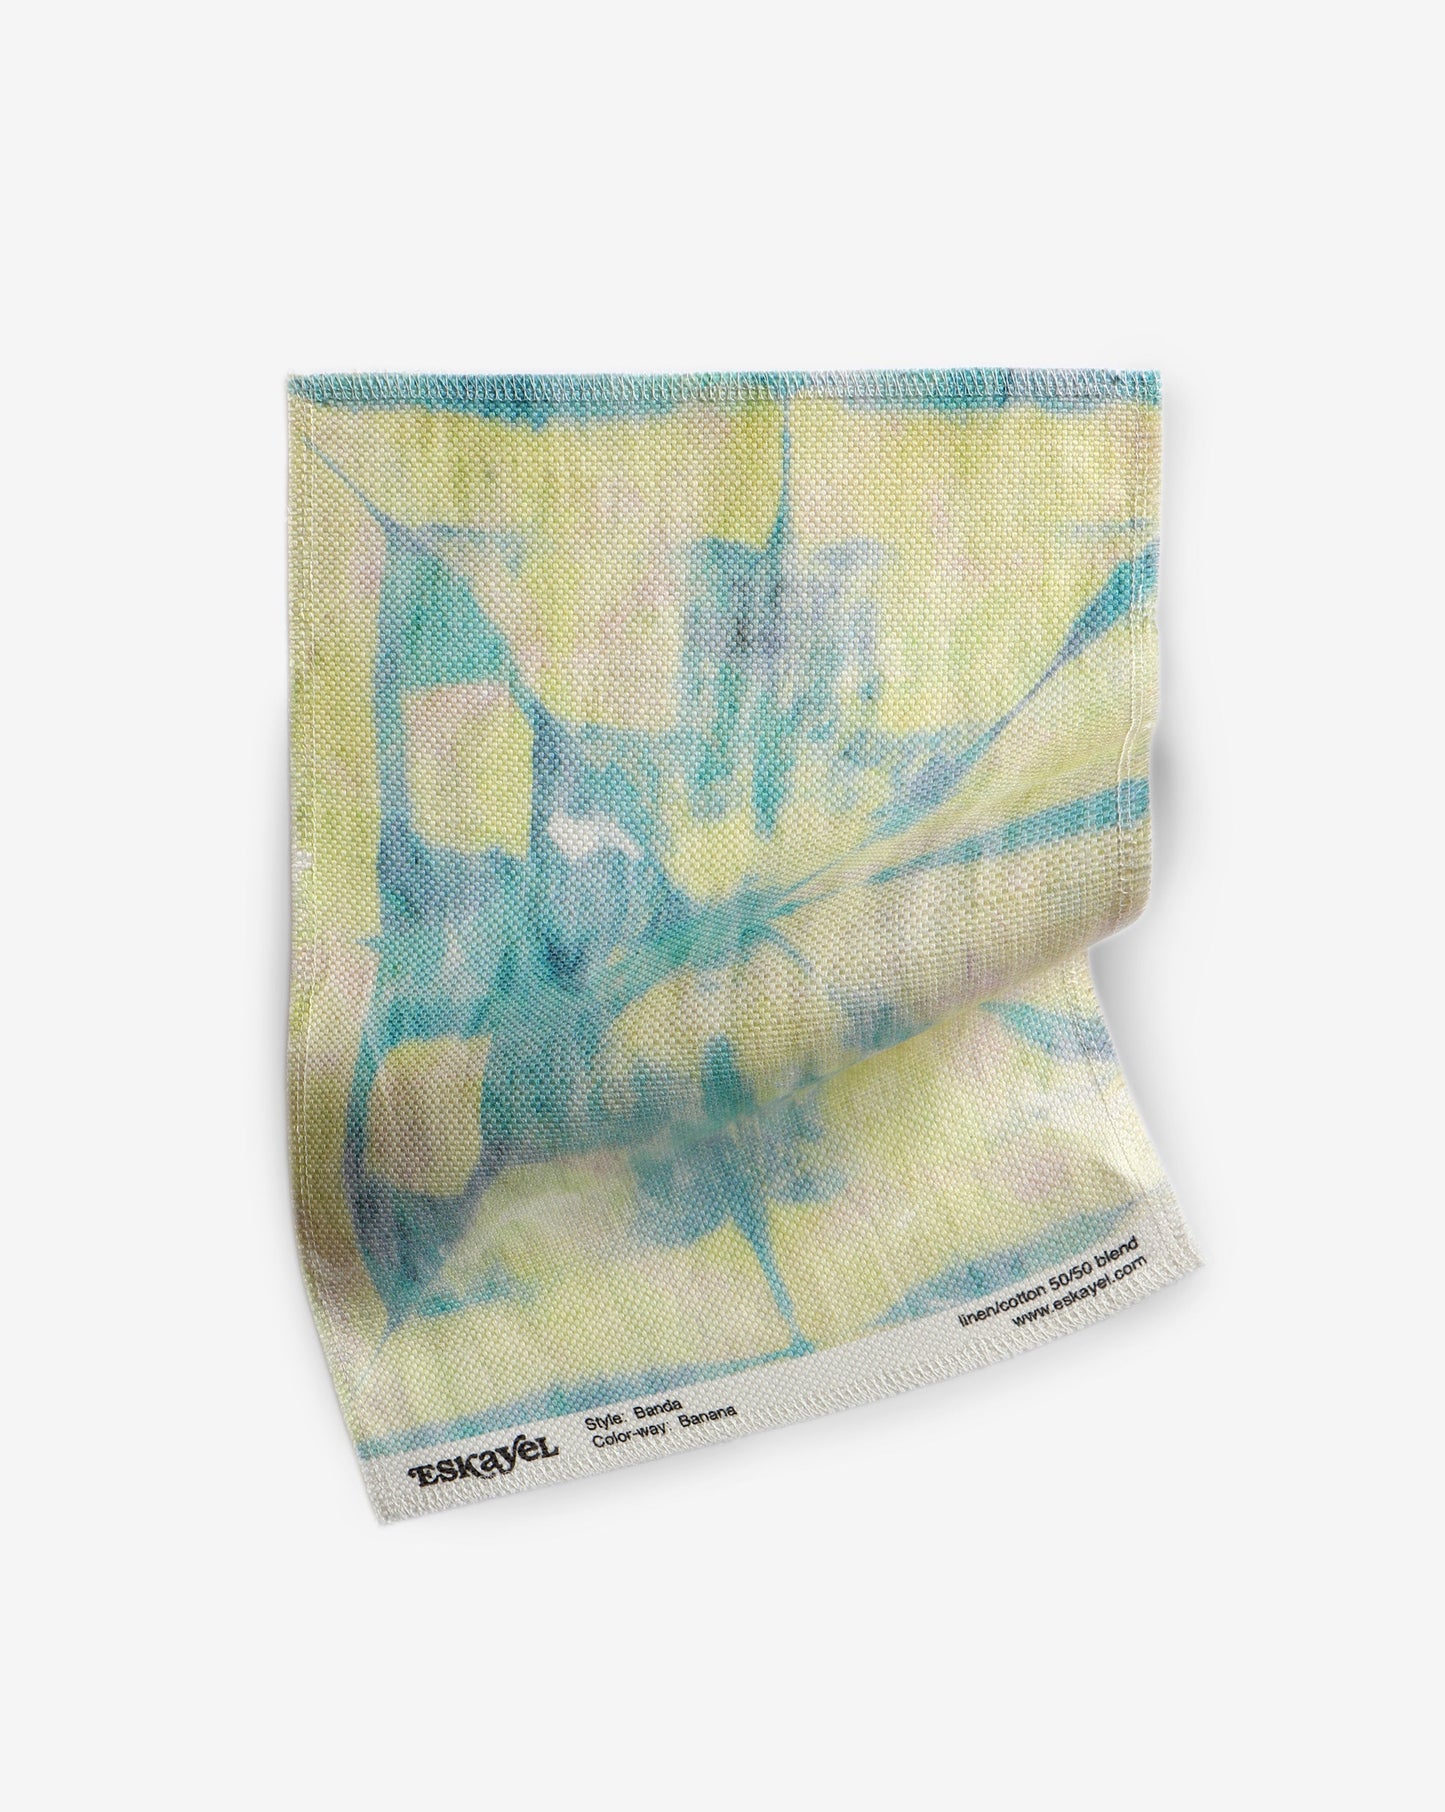 A piece of Banda fabric with a high-end blue and yellow pattern, created using shibori tie-dye techniques